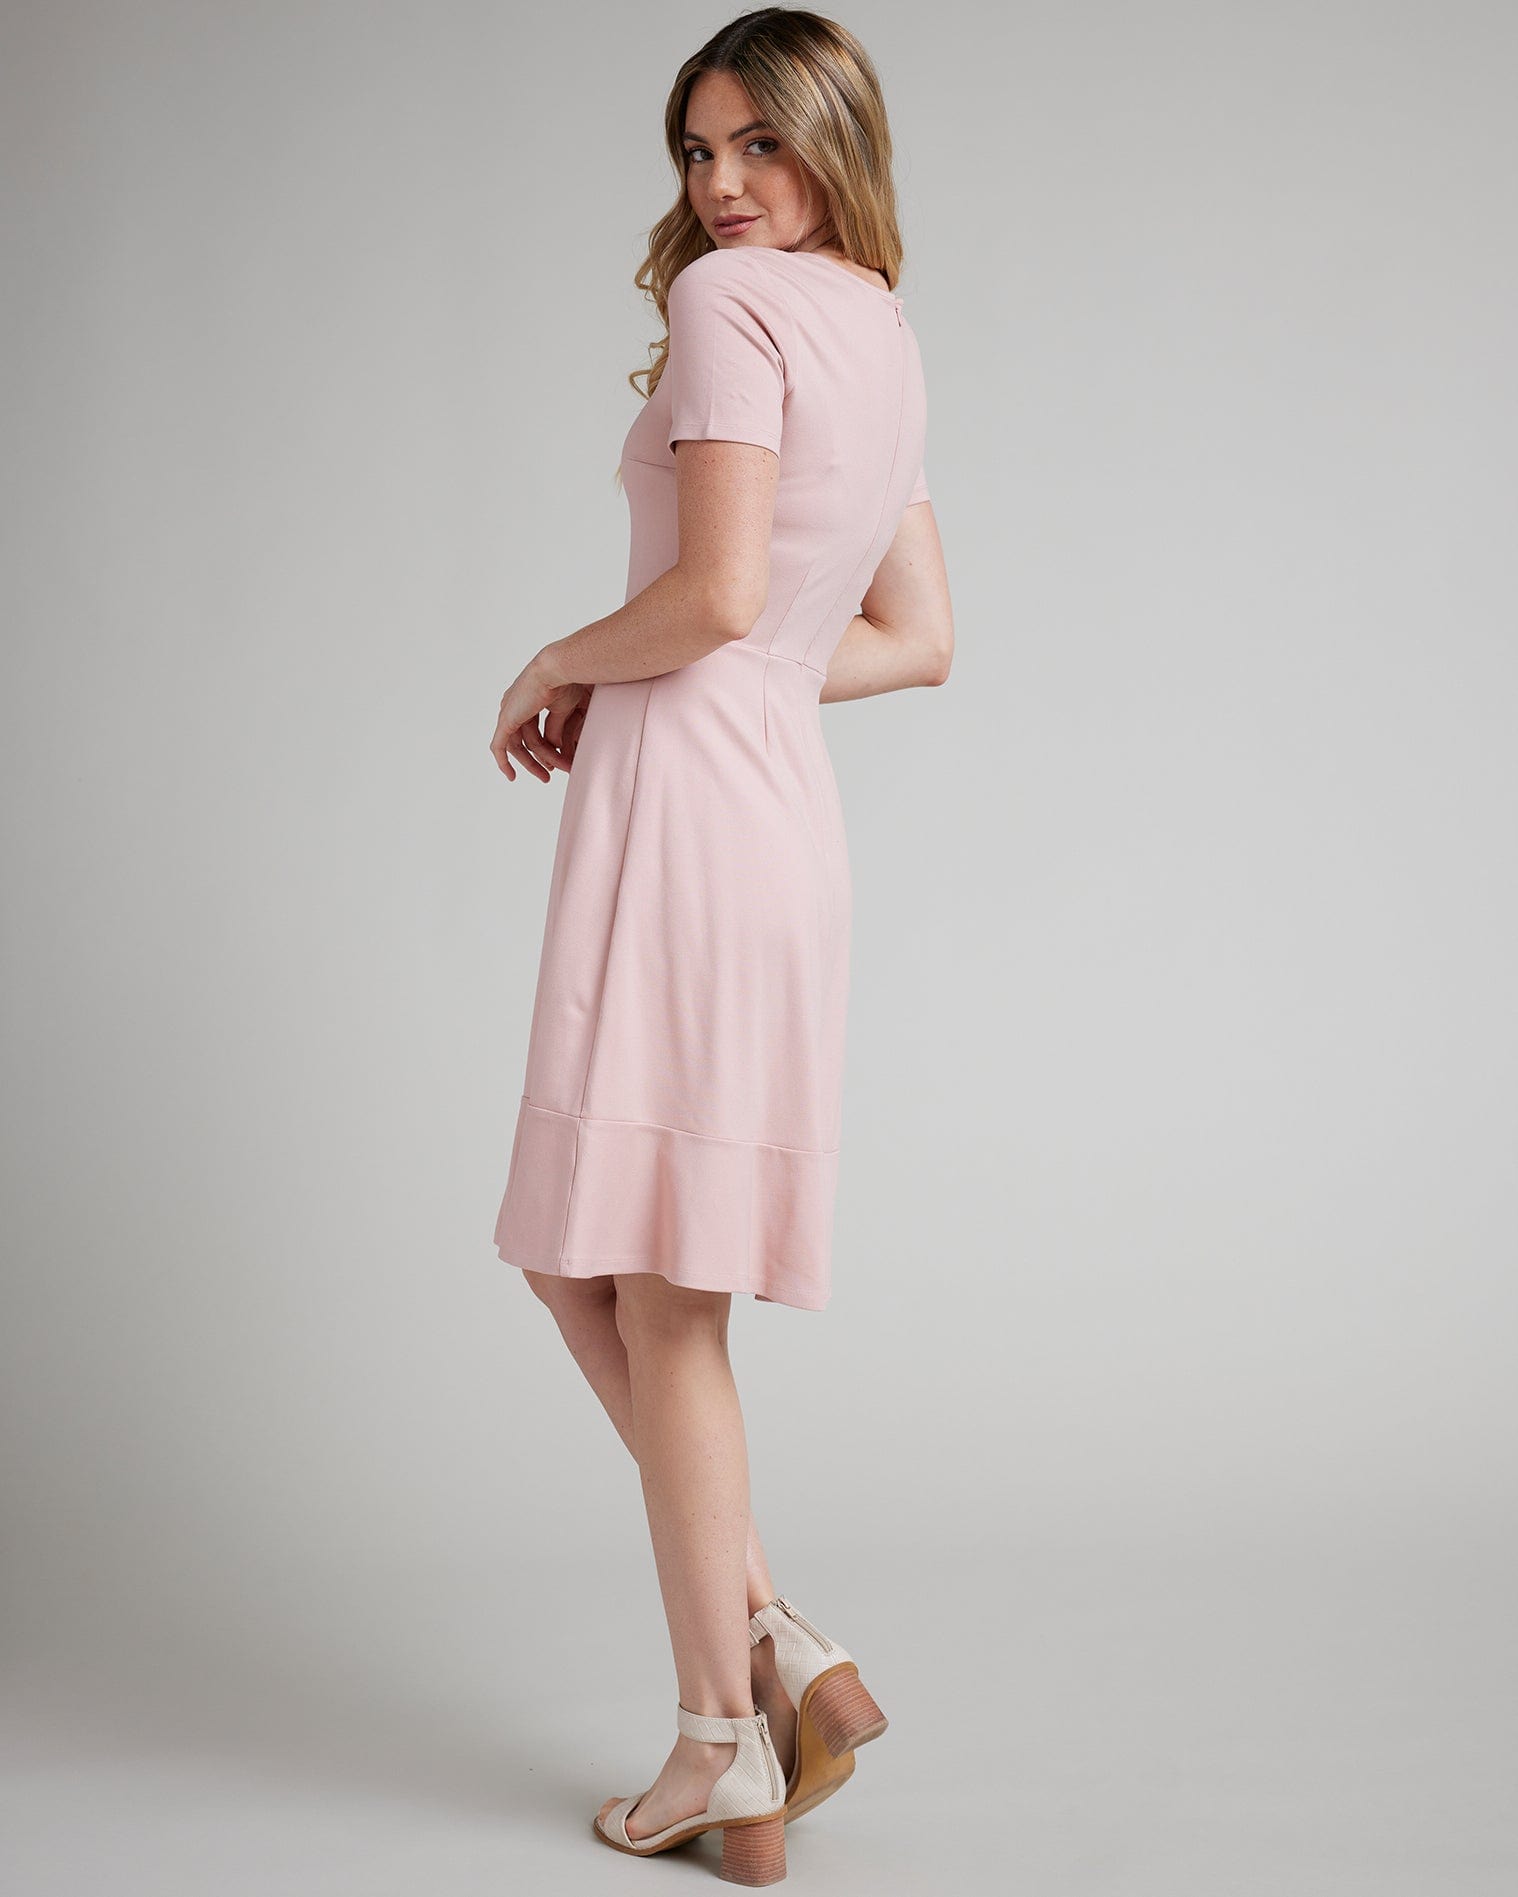 Woman in a short sleeve, knee-length simple pink dress